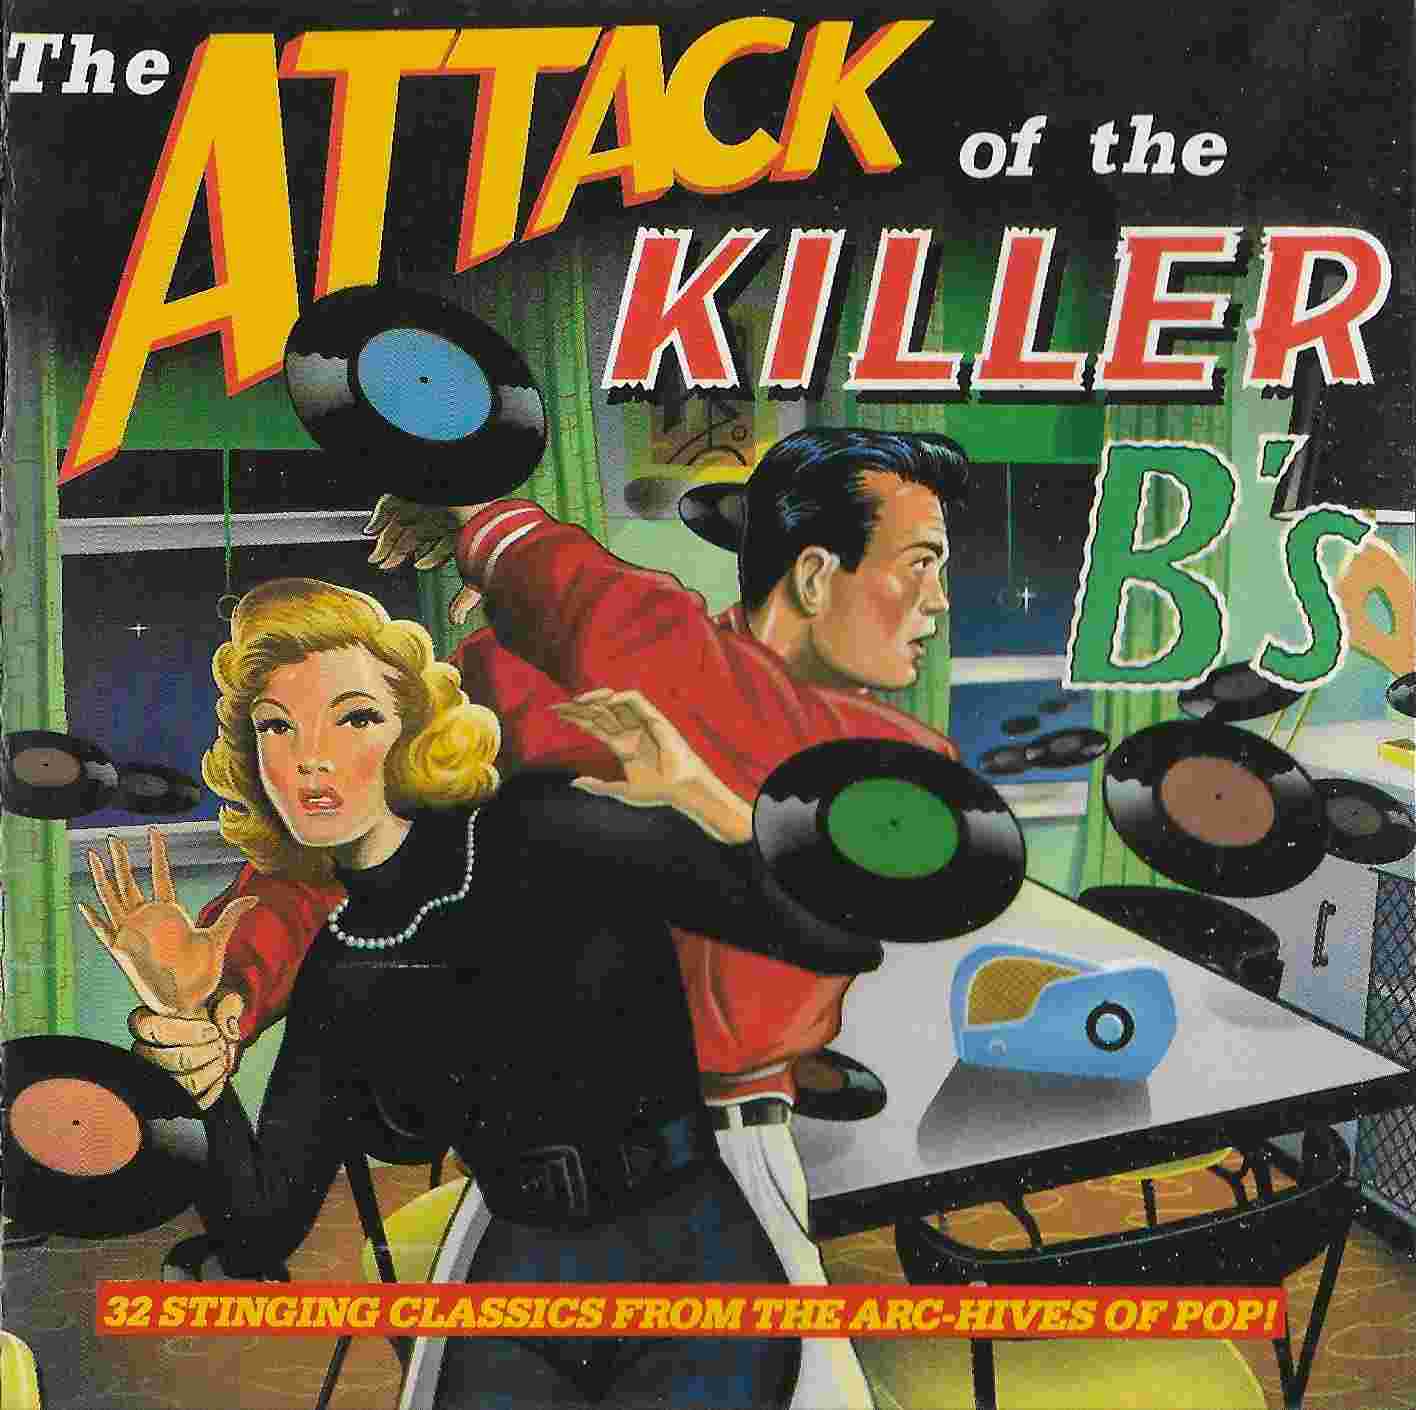 Picture of BBCCD2004 The attack of the killer b's by artist Various from the BBC cds - Records and Tapes library